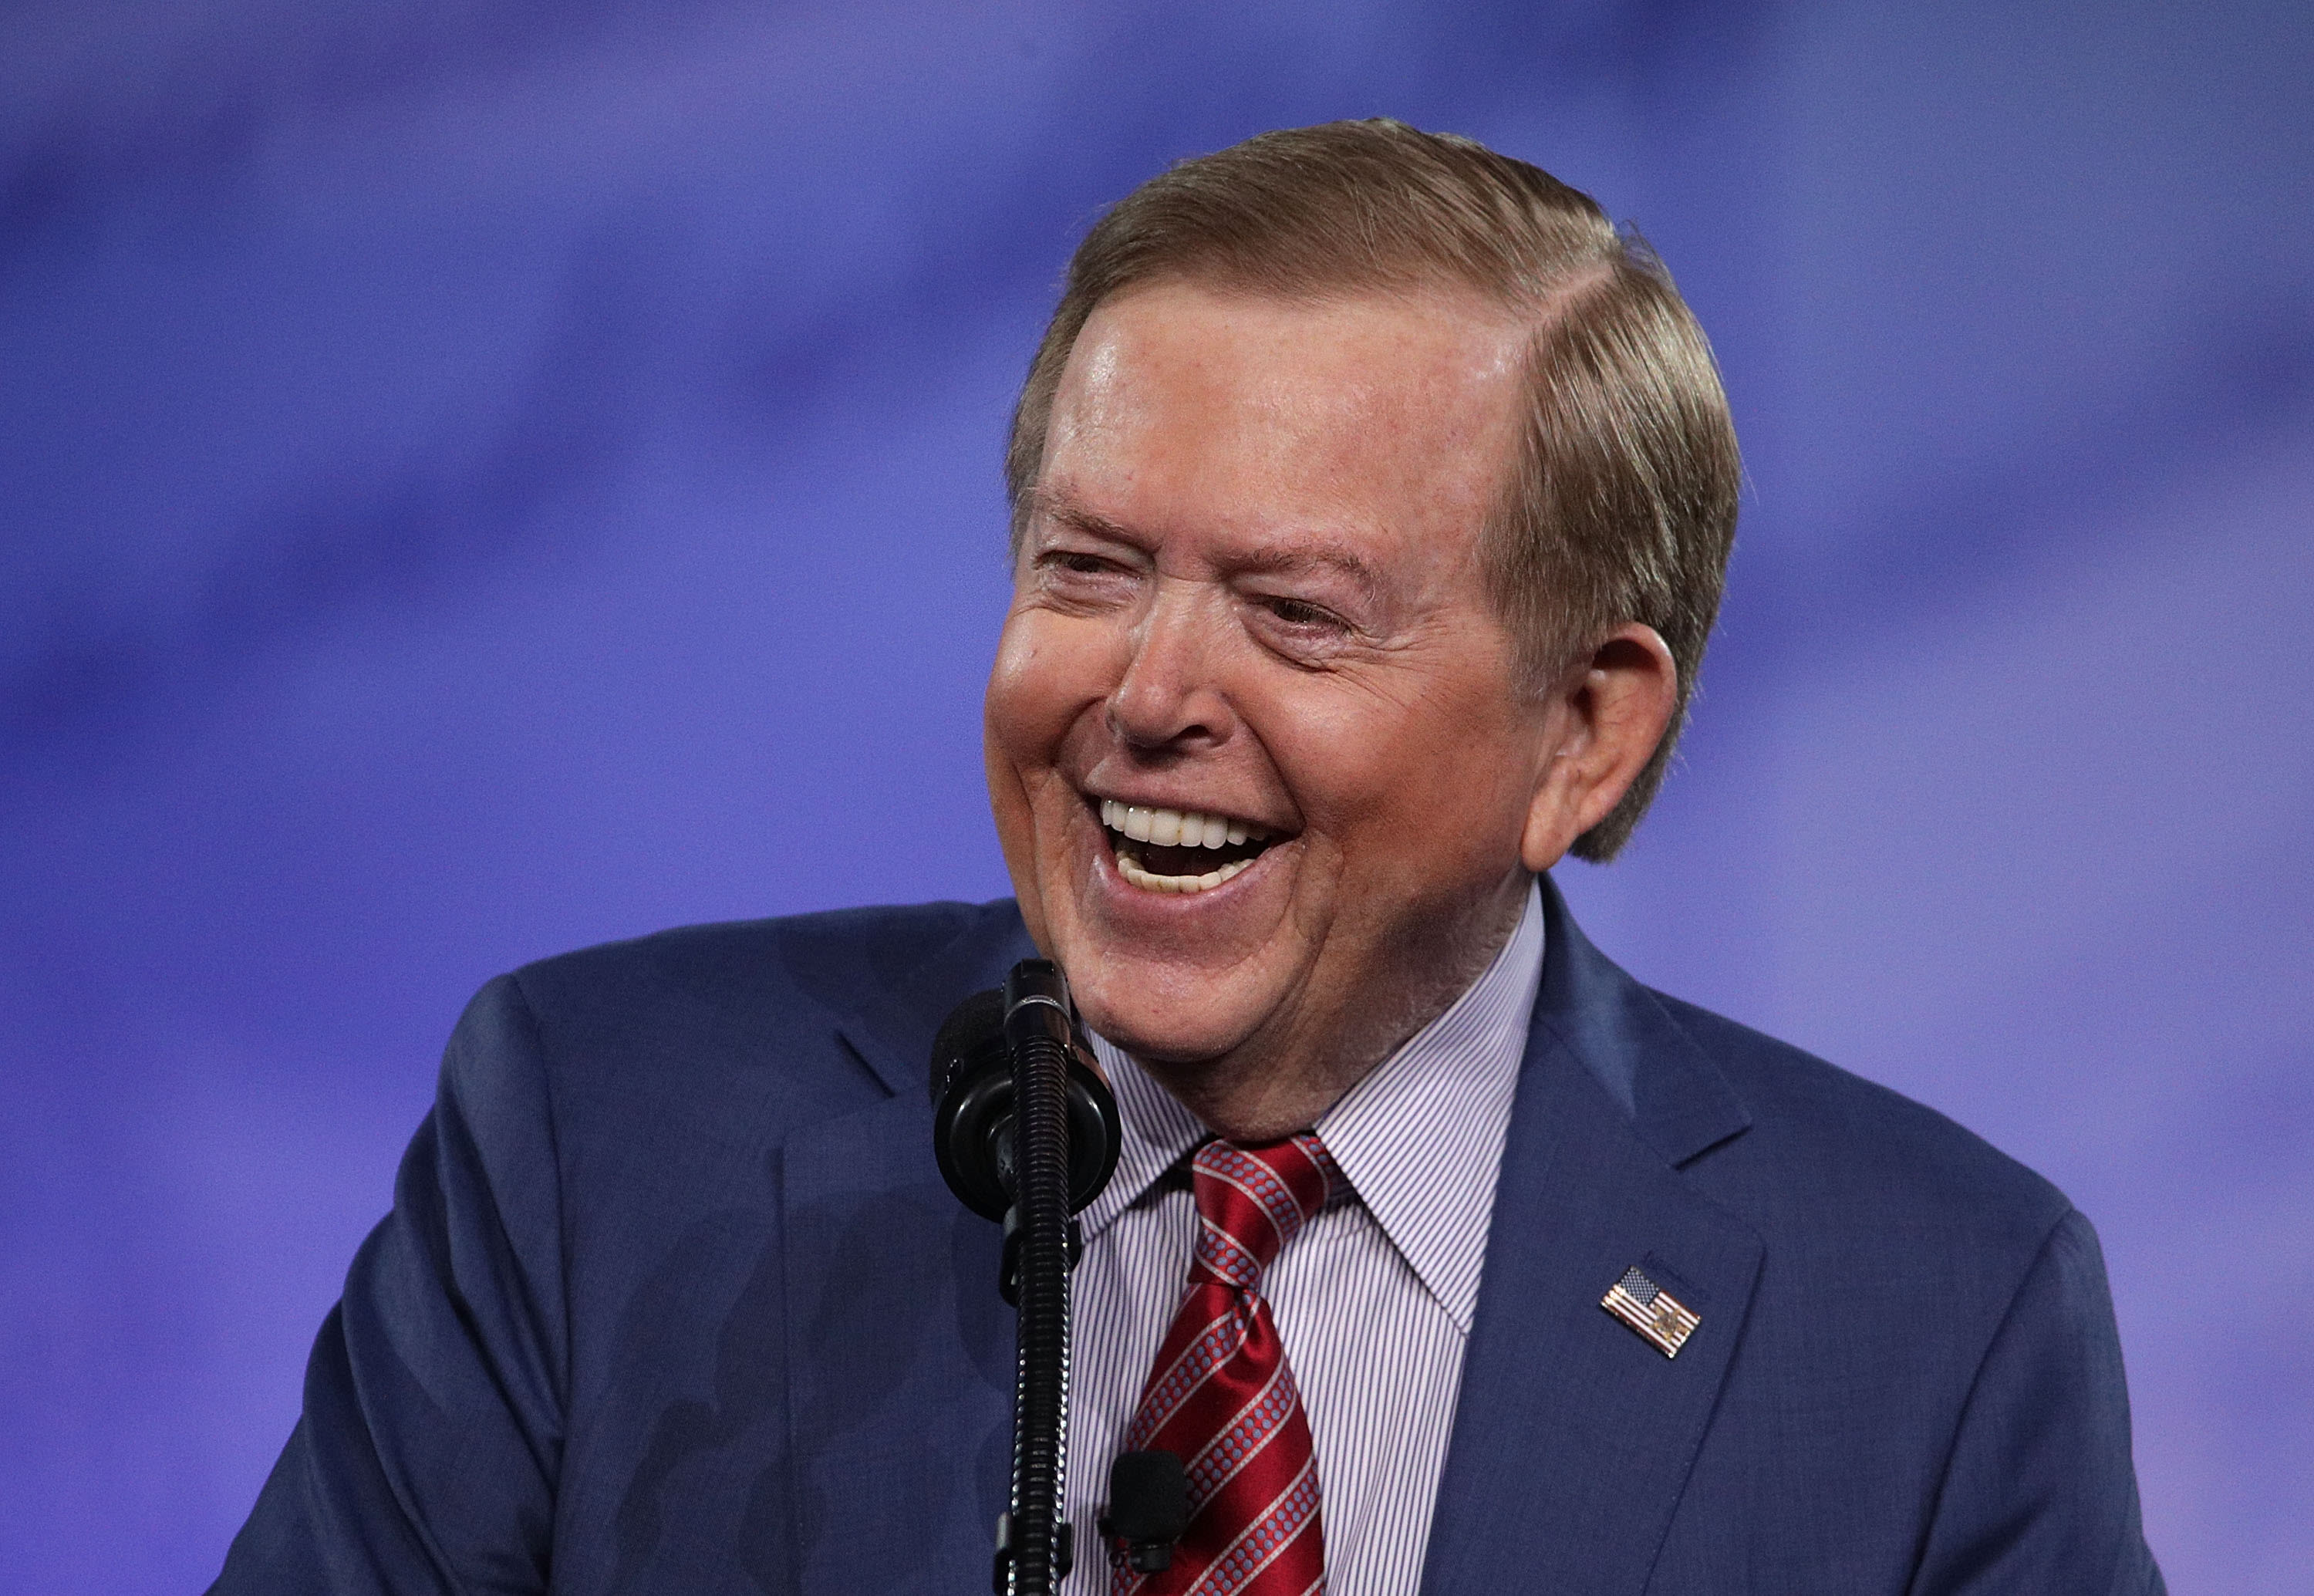 Lou Dobbs, Conservative Pundit and Former CNN Host, Dies at 78